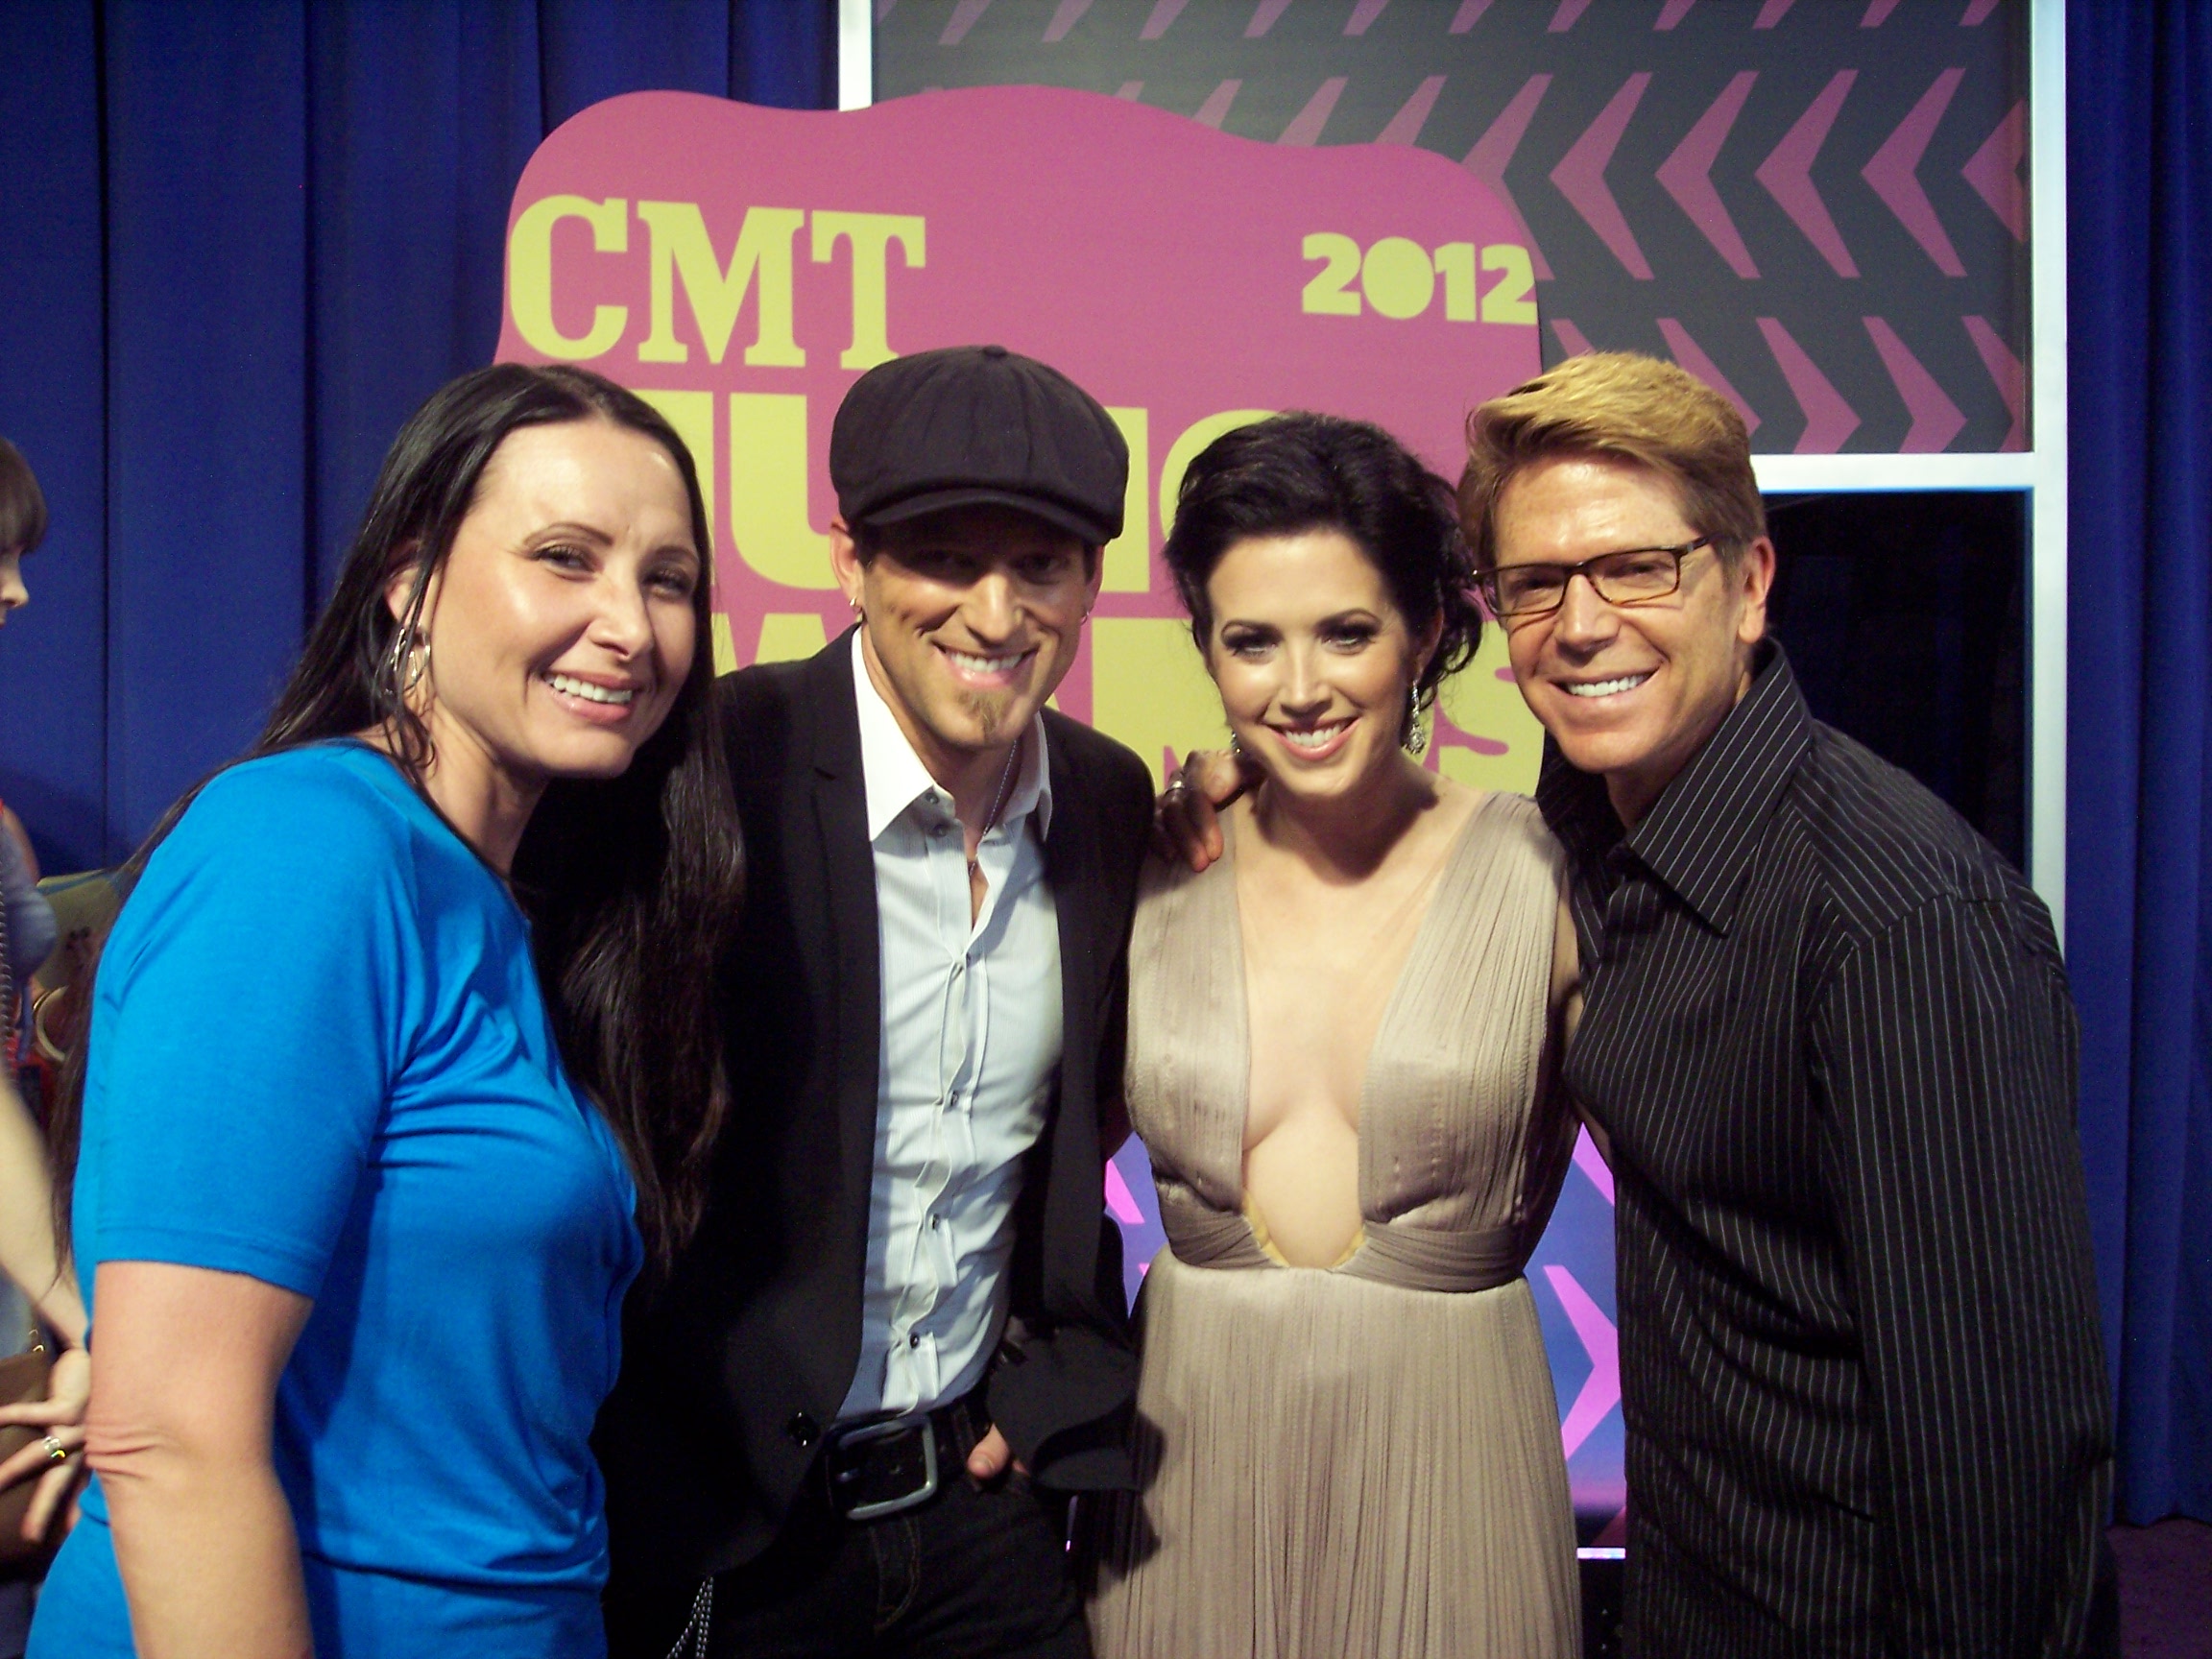 Chuck and Becca with Keifer and Shawna of Thompson Square